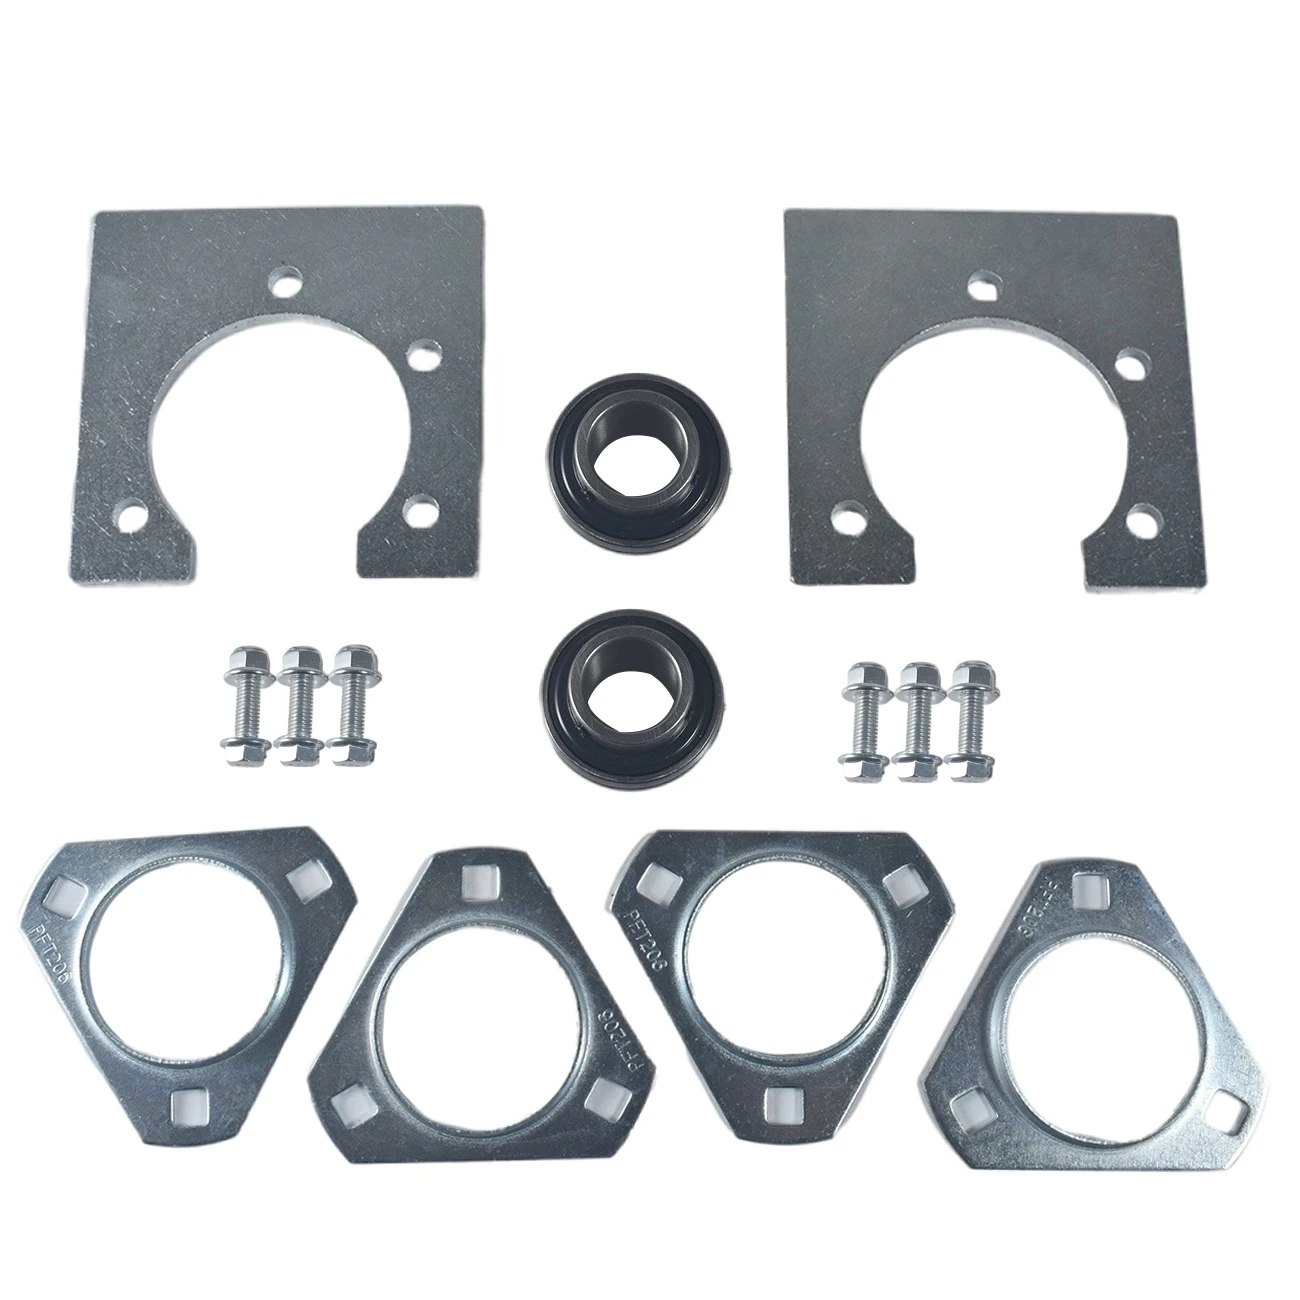 Go-Kart Live Axle Bearing Kit For 1in Axle with 3 Hole Flangettes